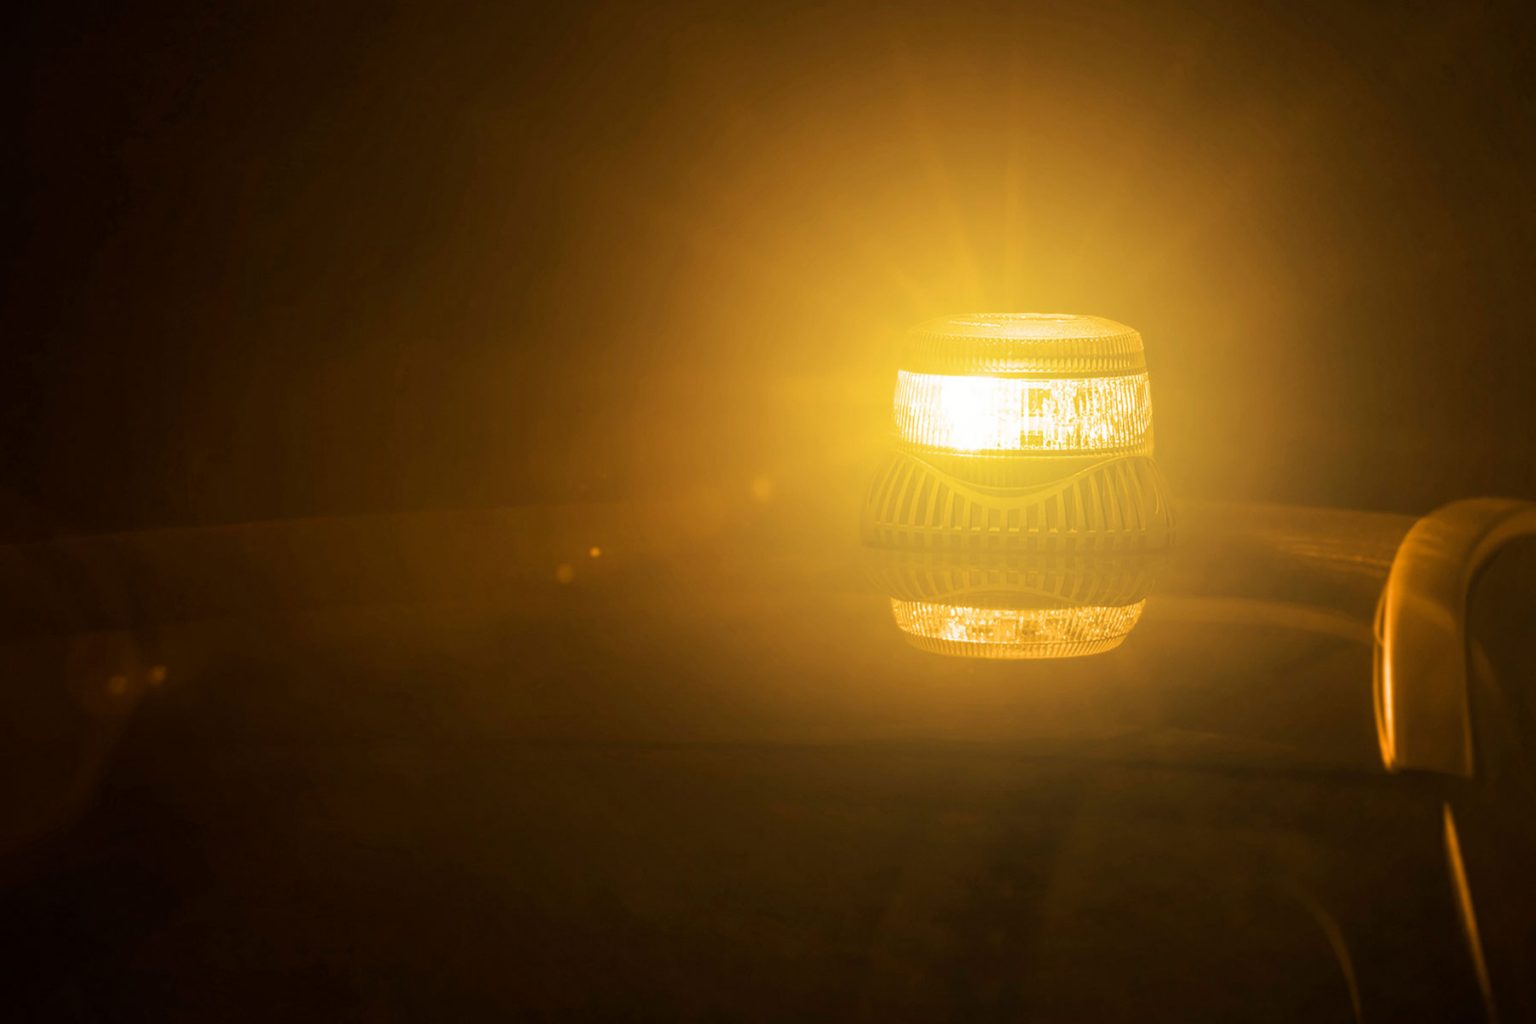 Page Image of Amber Beacon Lit on Vehicle Roof with Dark Surroundings and Reflection